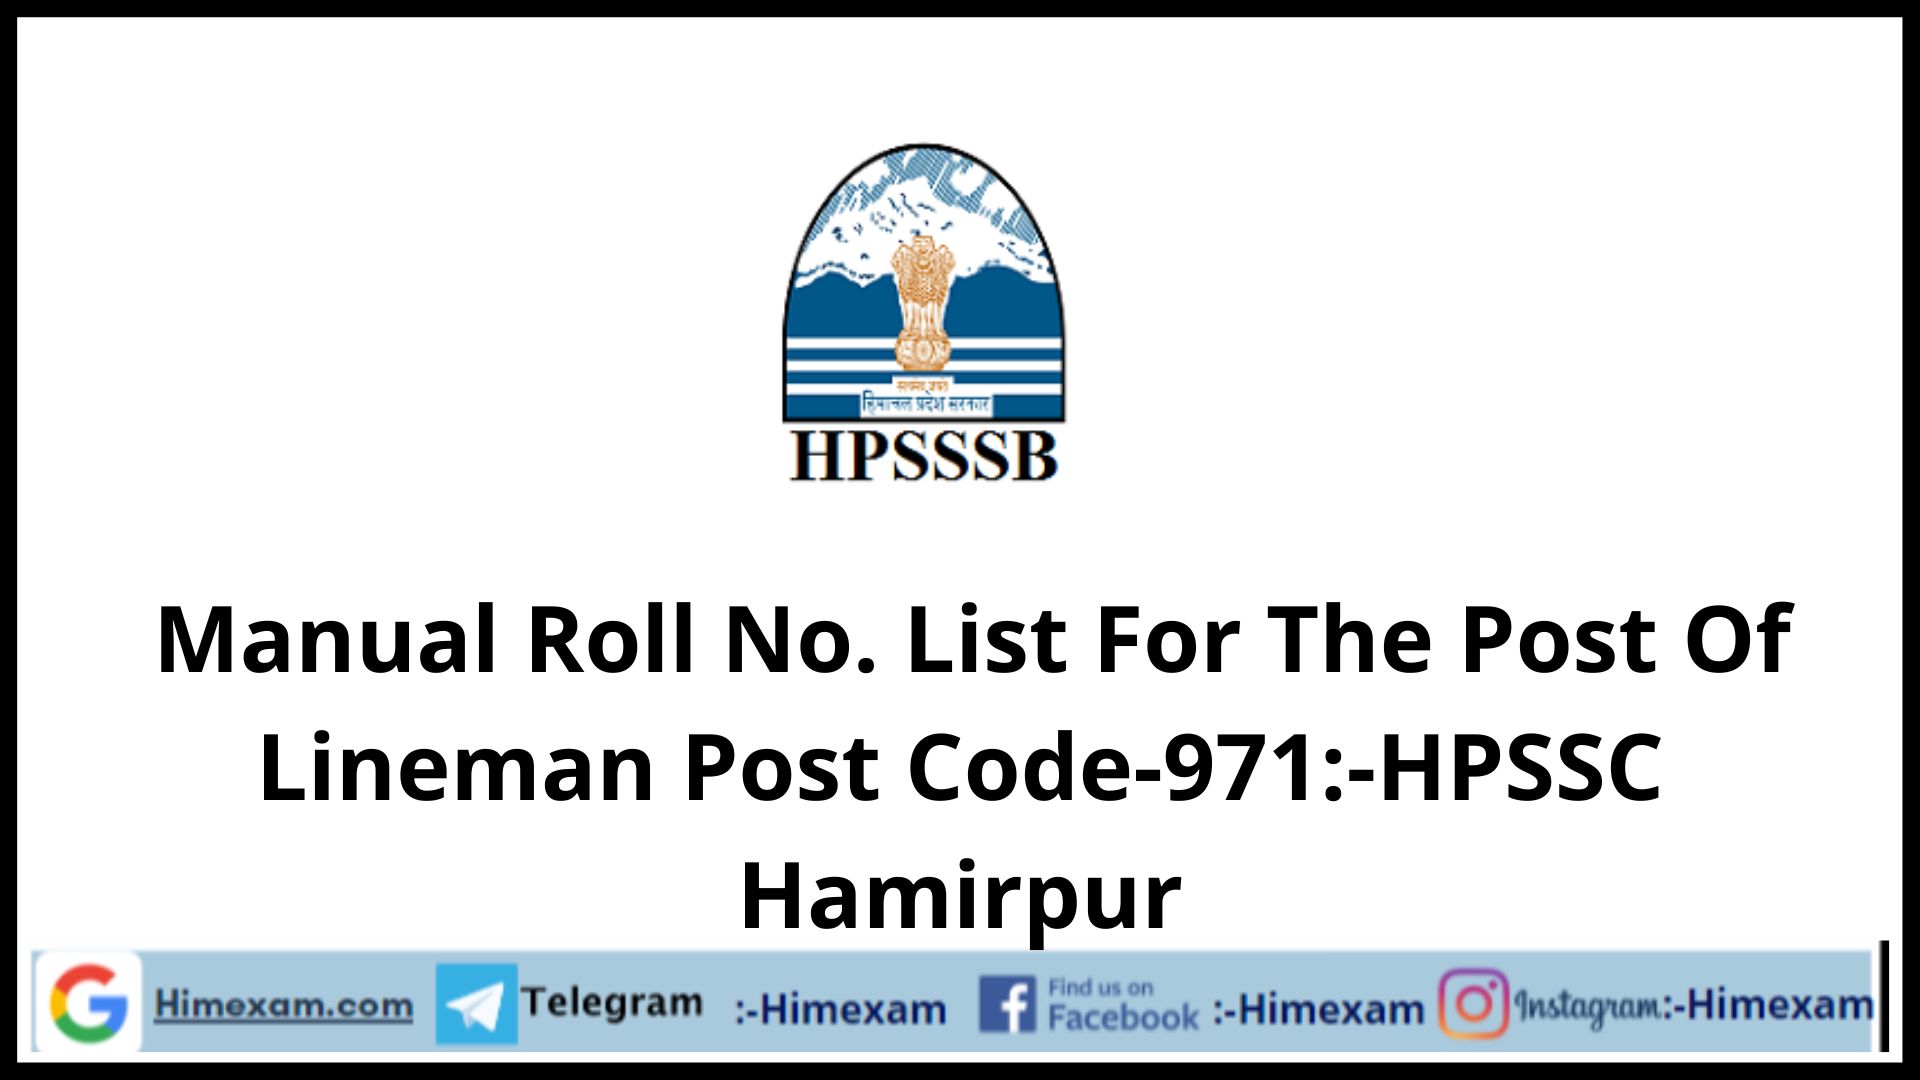 Manual Roll No. List For The Post Of Lineman Post Code-971:-HPSSC Hamirpur